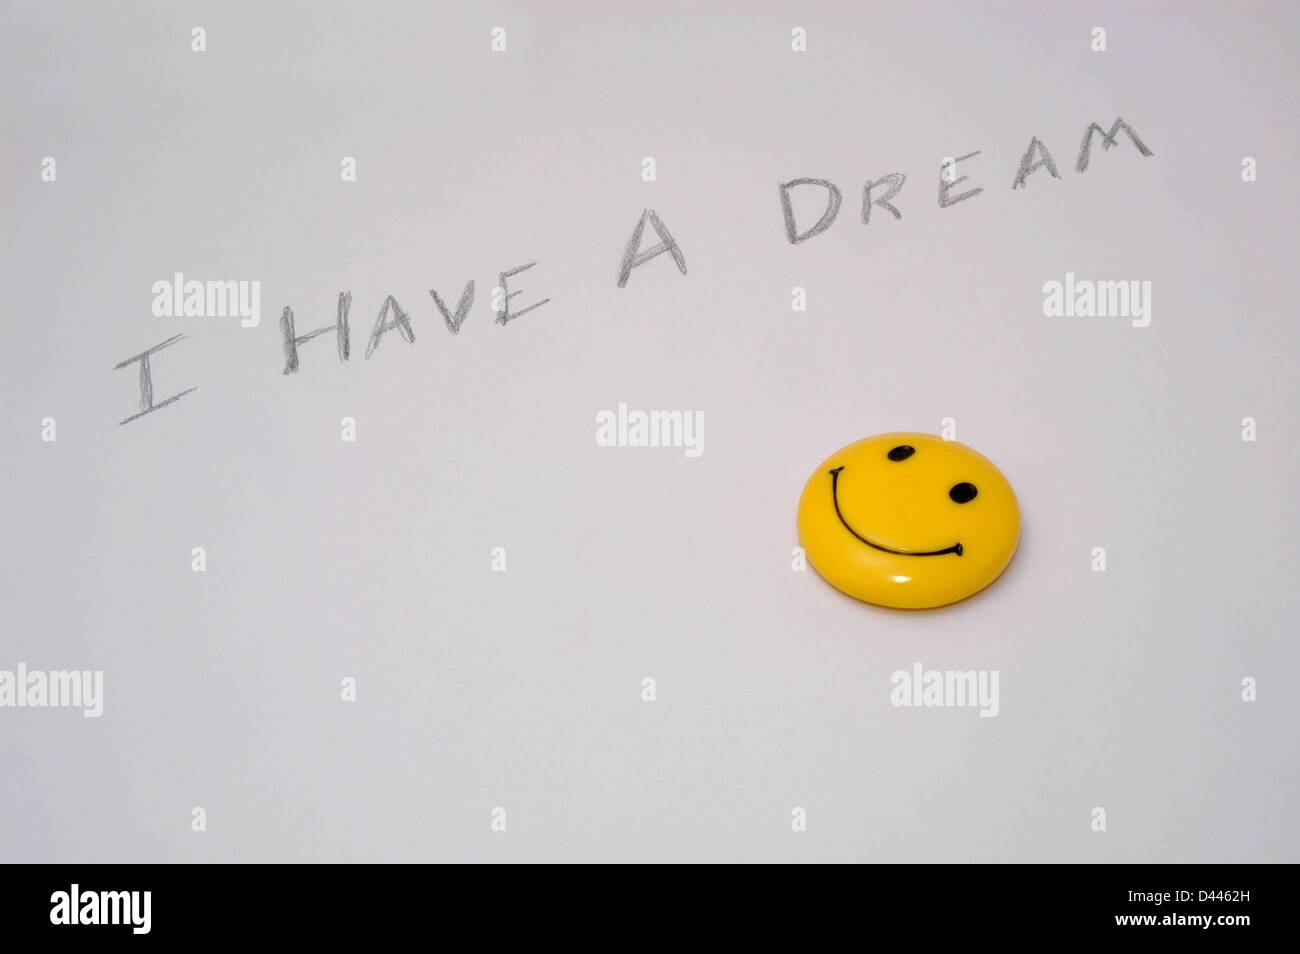 Illustration - A smiley face symbol is pictured next to the writing 'I have a dream' in Berlin, Germany, 22 December 2007. Fotoarchiv für ZeitgeschichteS.Steinach Stock Photo